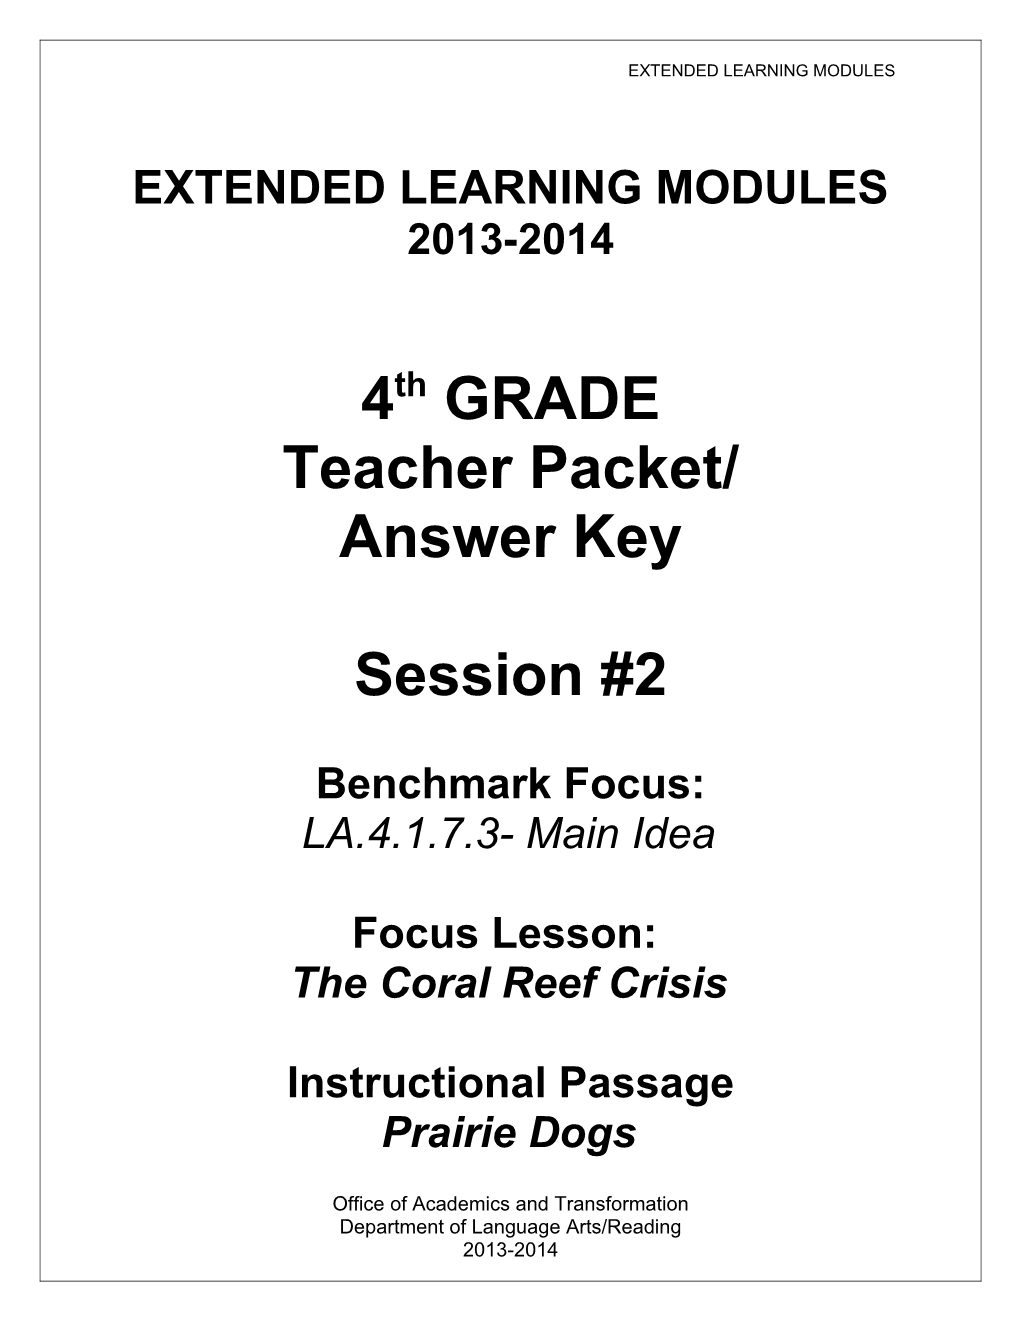 Extended Learning Modules